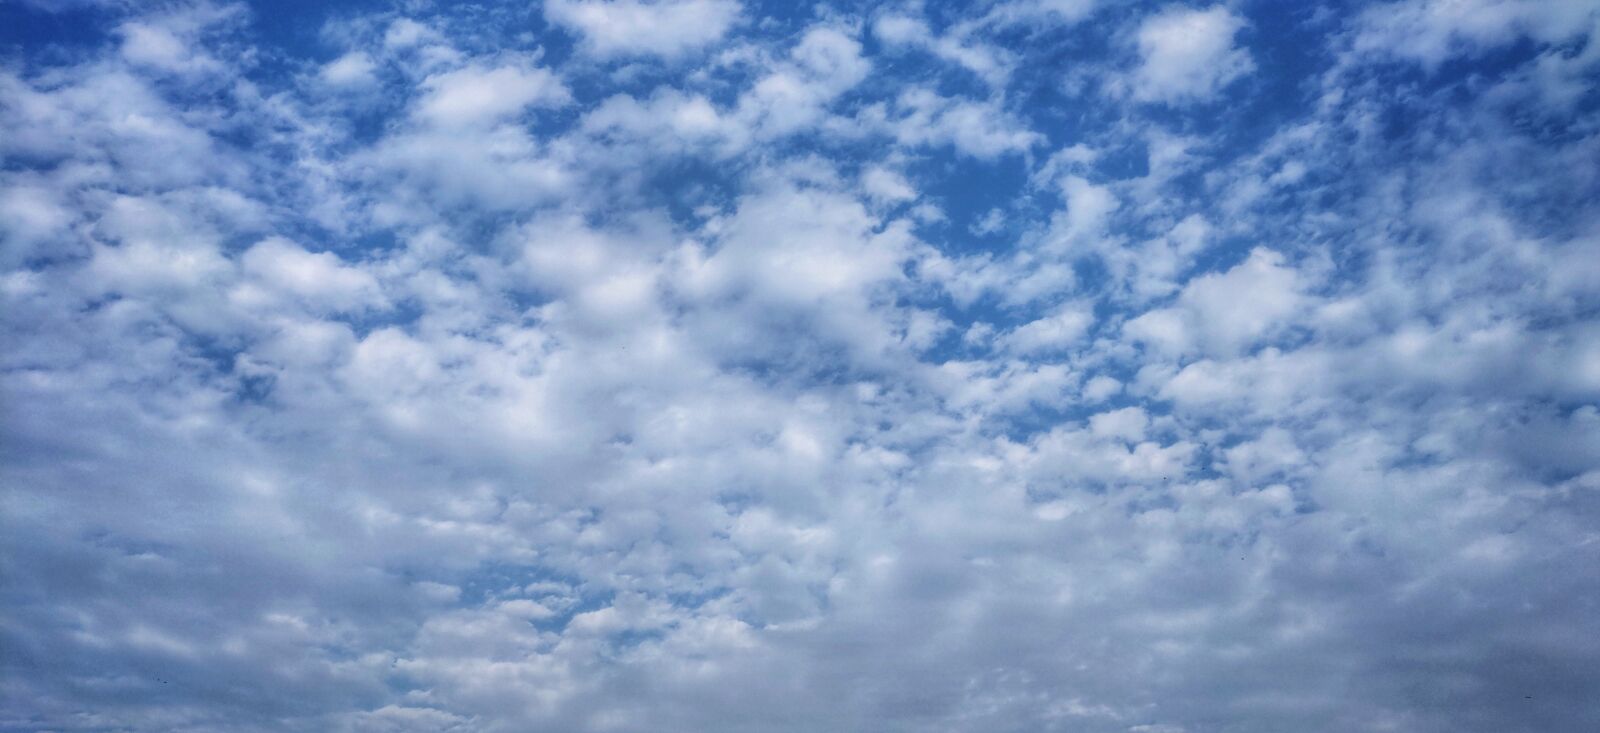 OnePlus A6010 sample photo. Clouds, sky, nature photography